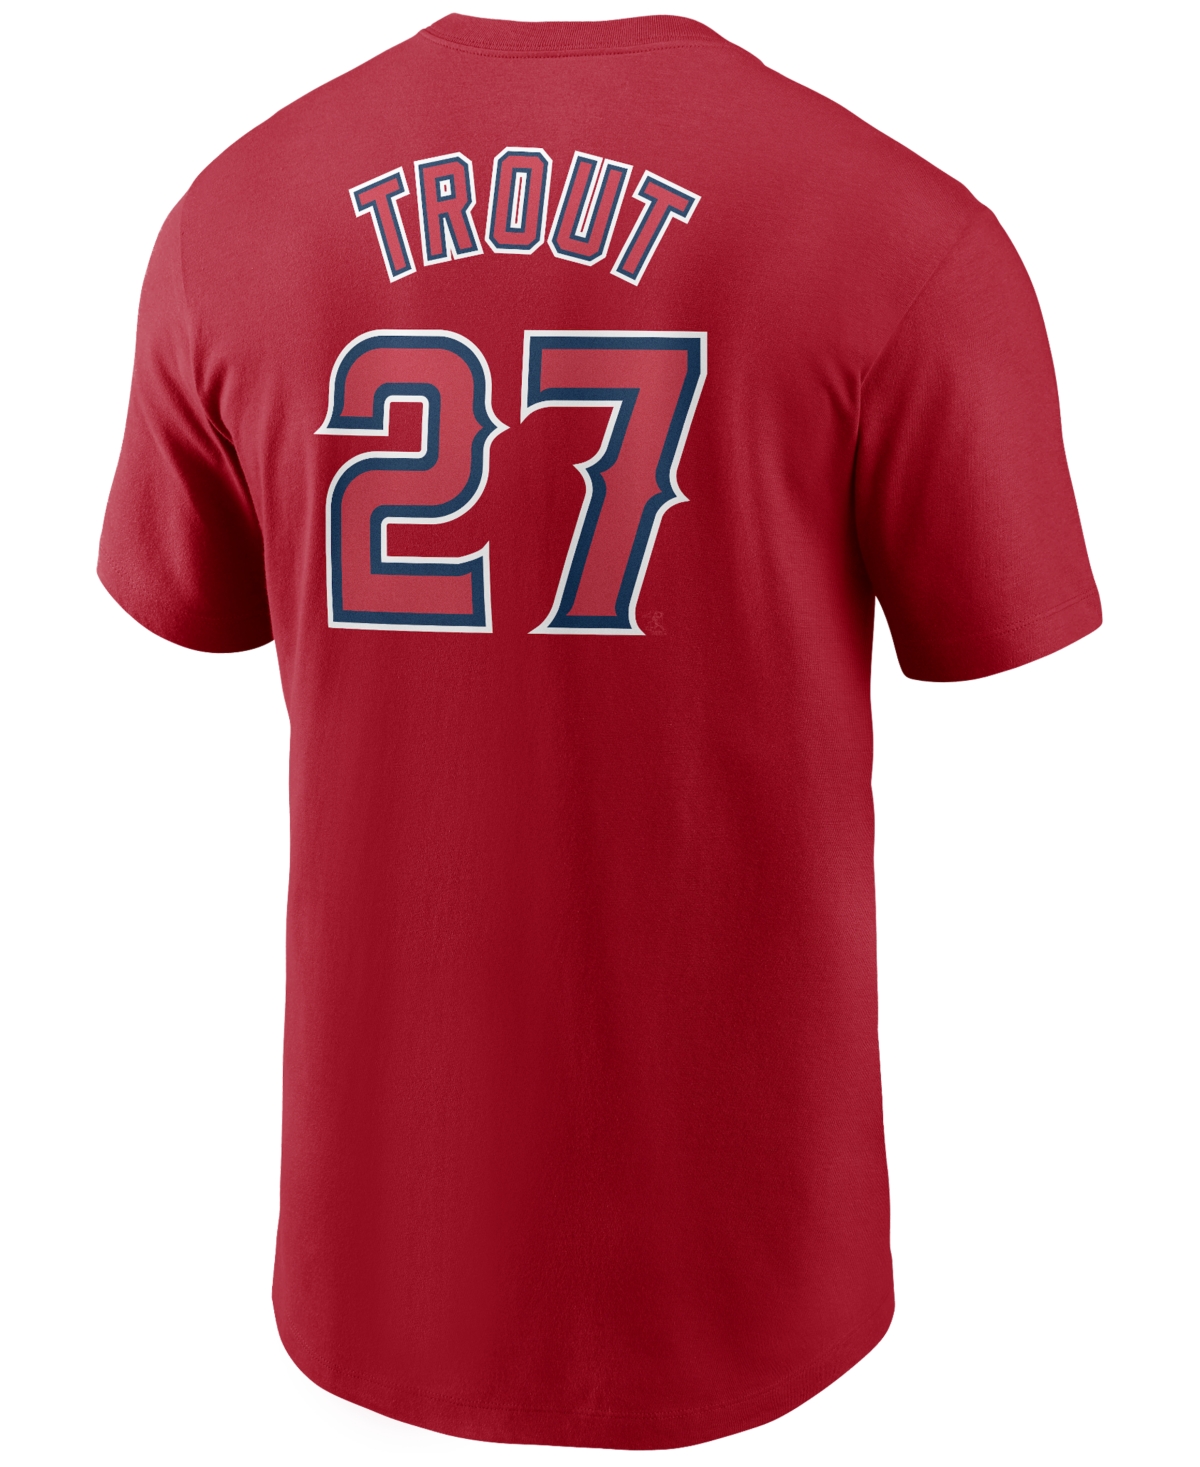 Nike Men's Mike Trout Los Angeles Angels Name and Number Player T-Shirt